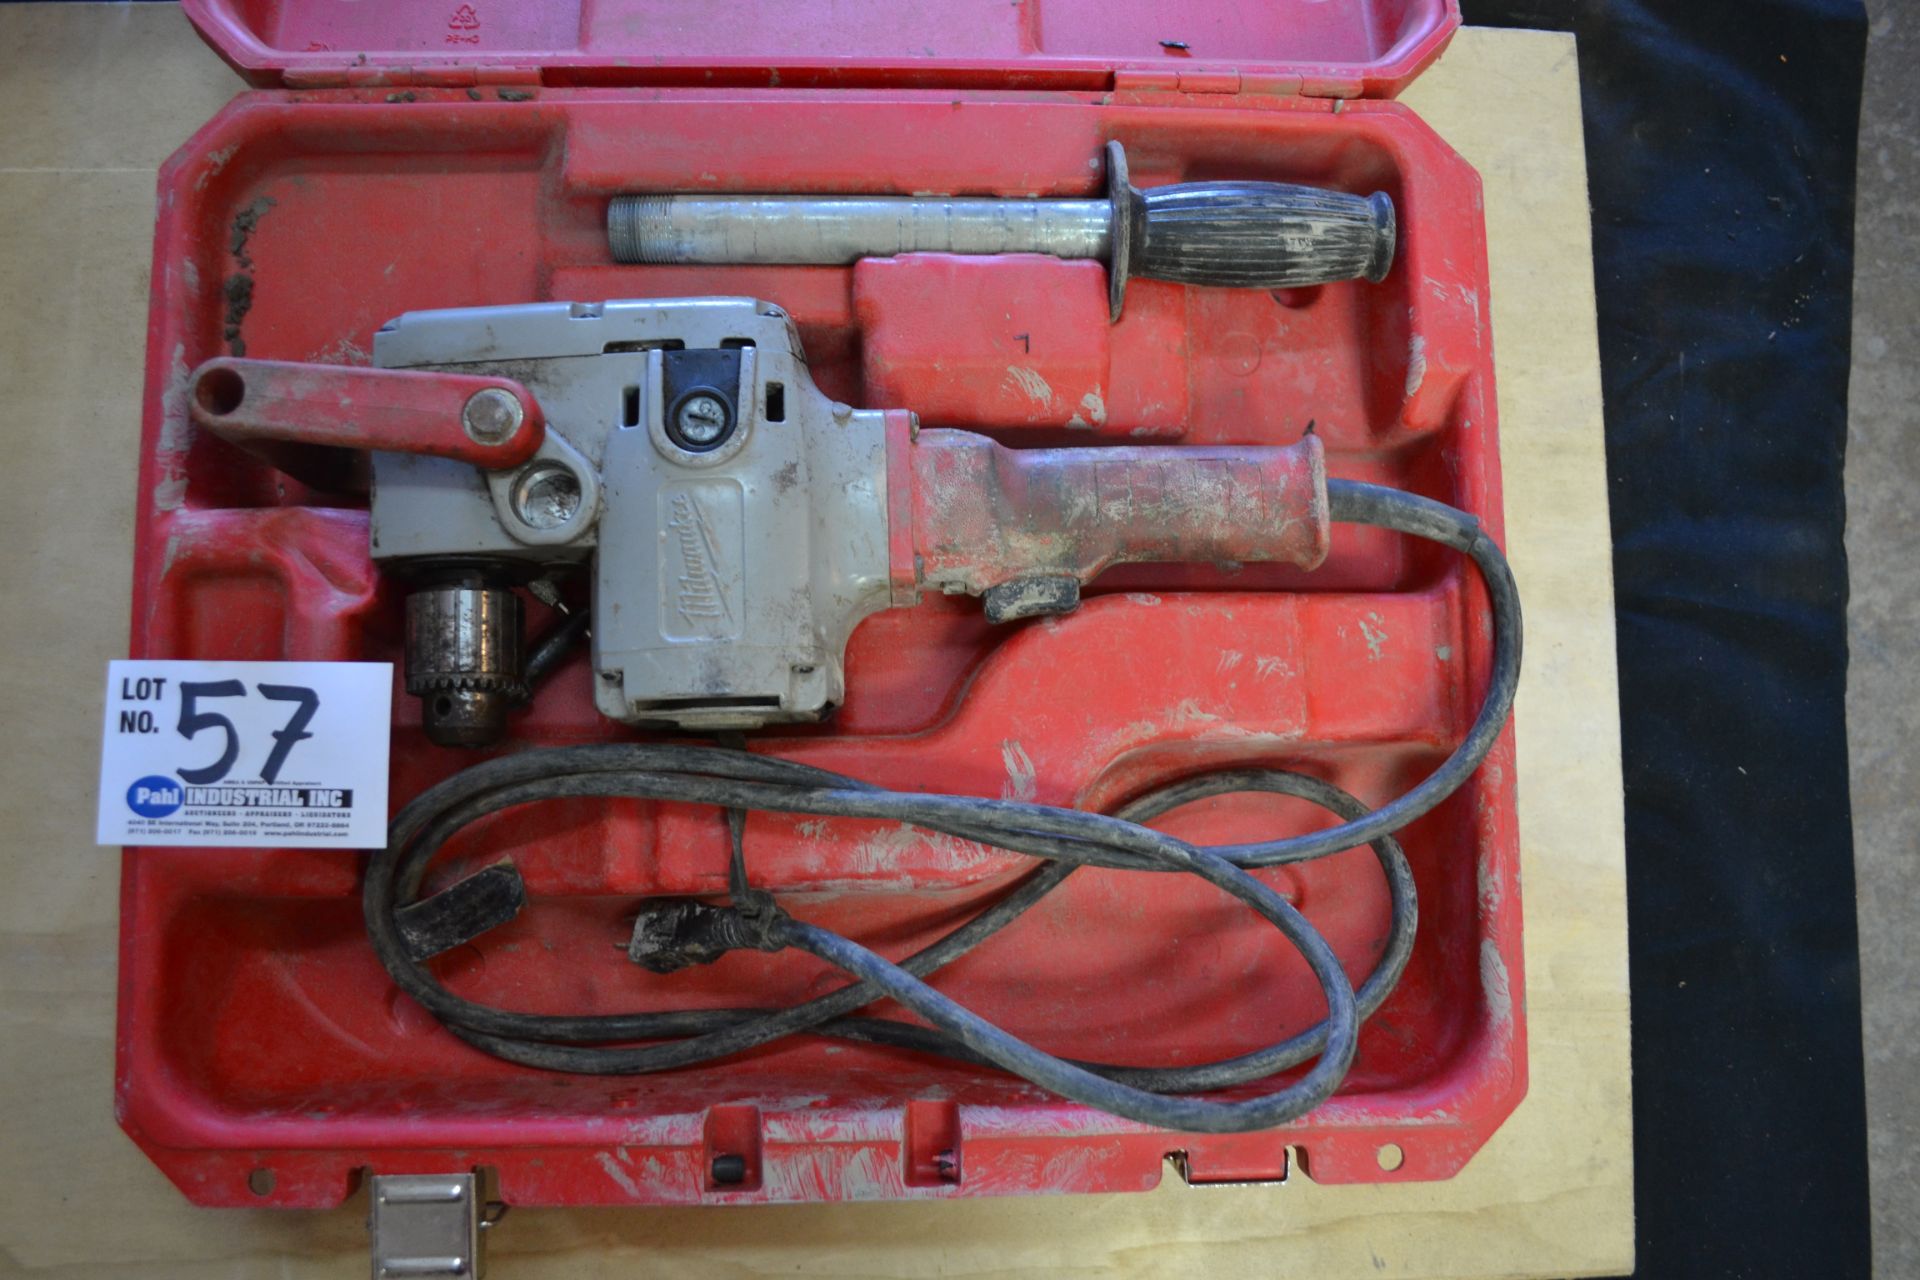 Milwaukie Hole Hawg 1/2" Corded Electric Drill